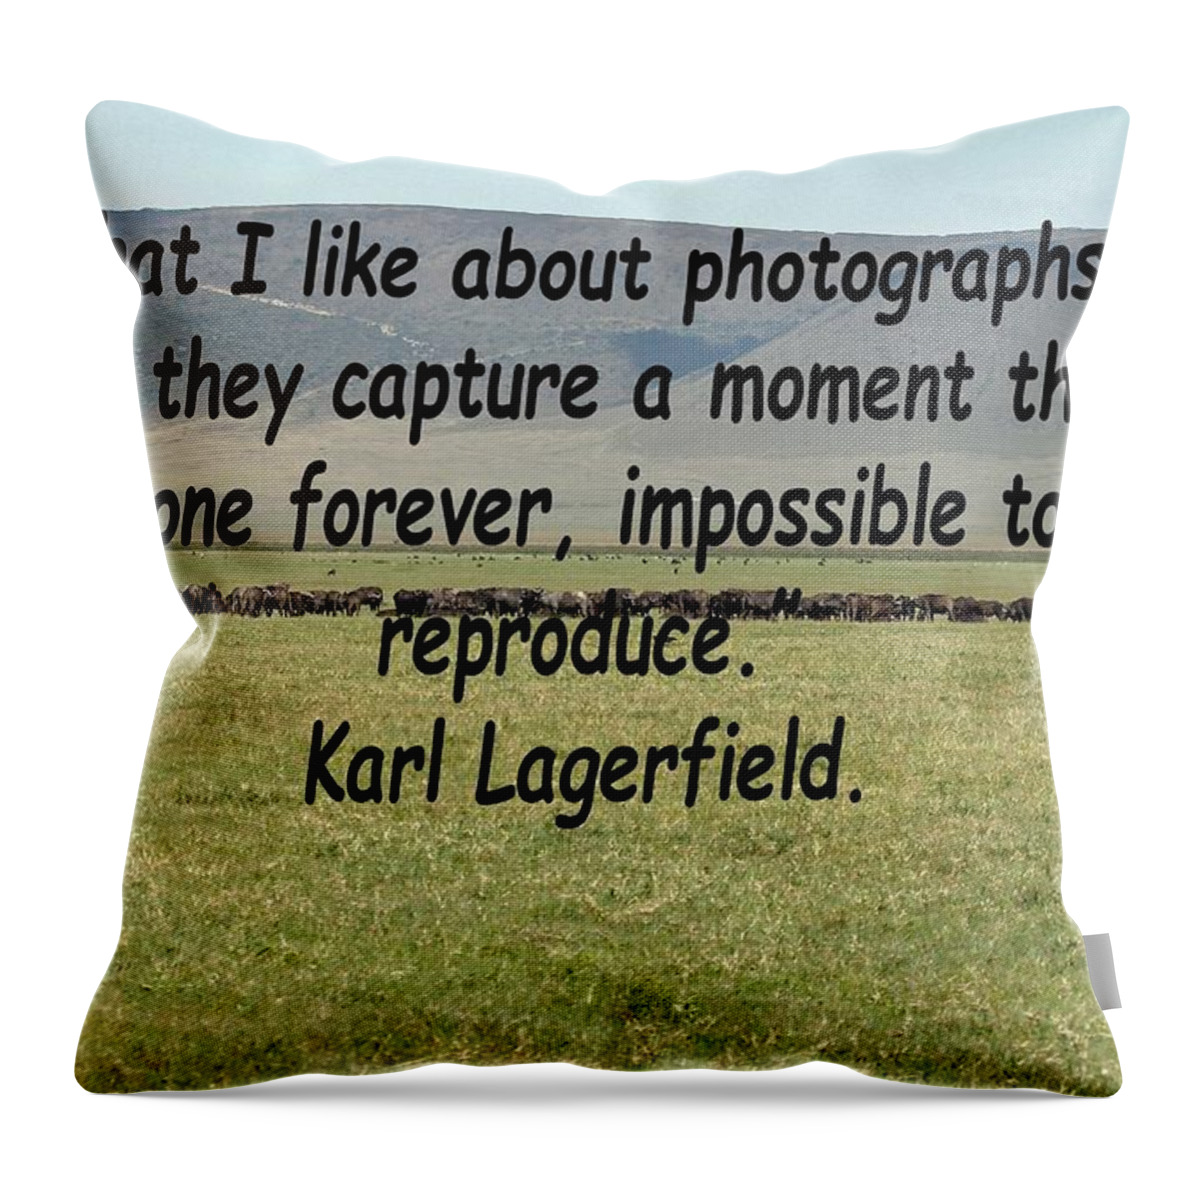 Karl Lagerfeld Throw Pillow featuring the photograph Karl Lagerfeld Quote by Tony Murtagh